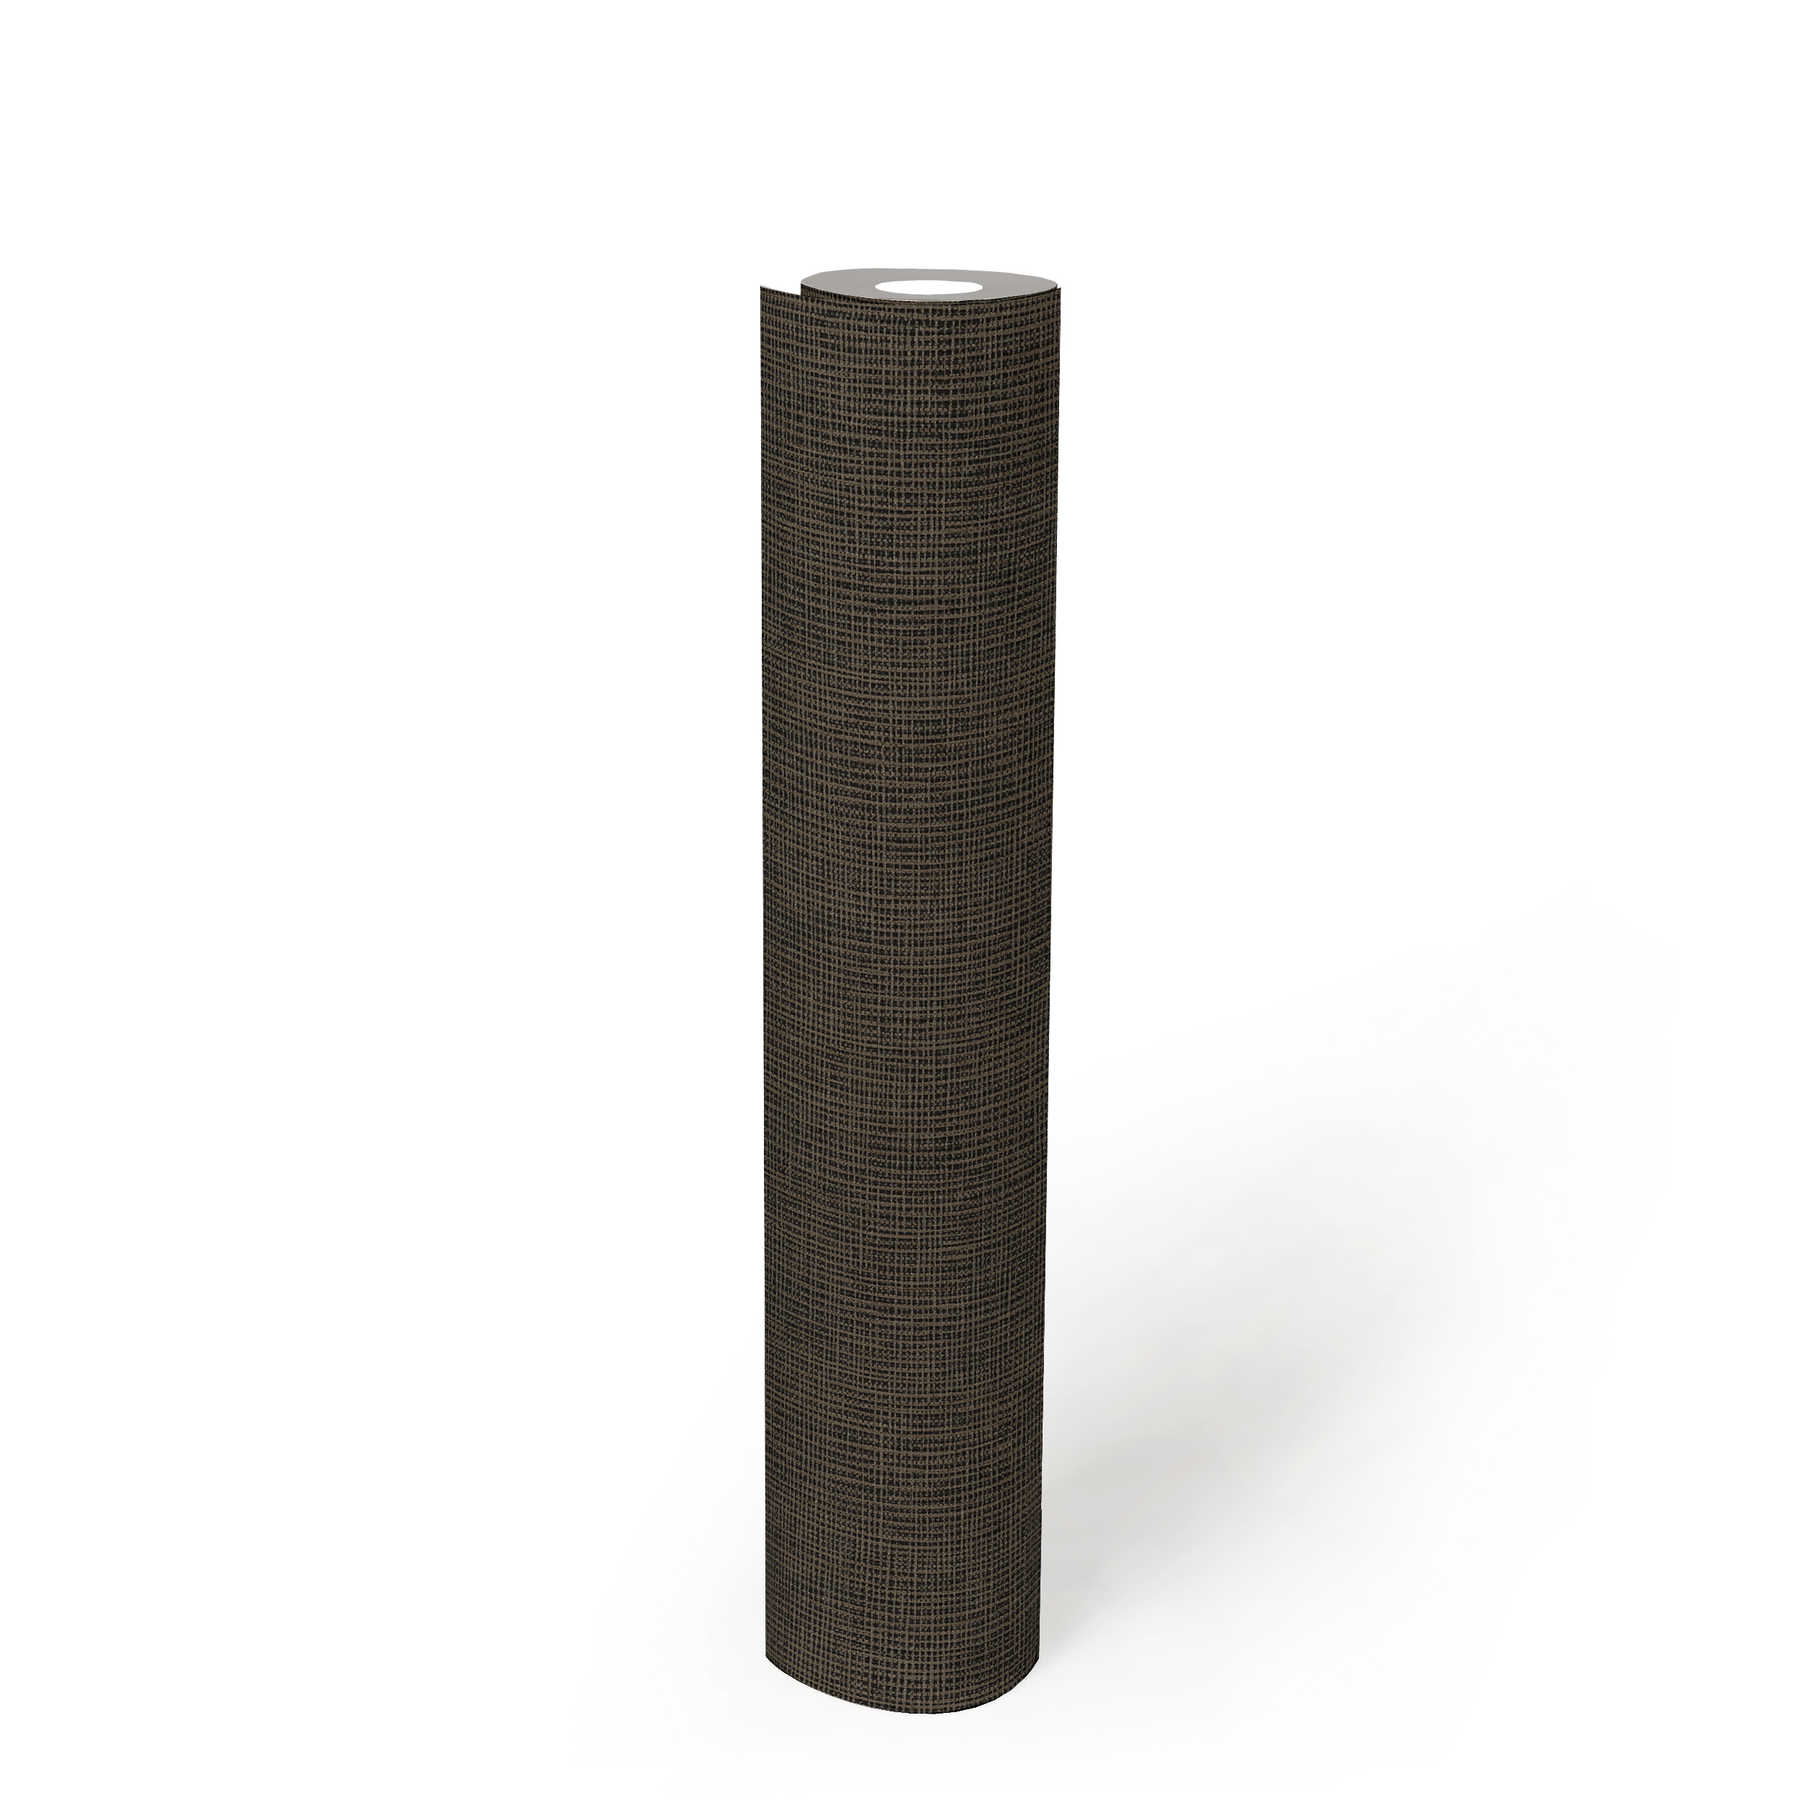             Brown non-woven wallpaper with grey & gold details - blue, grey, silver
        